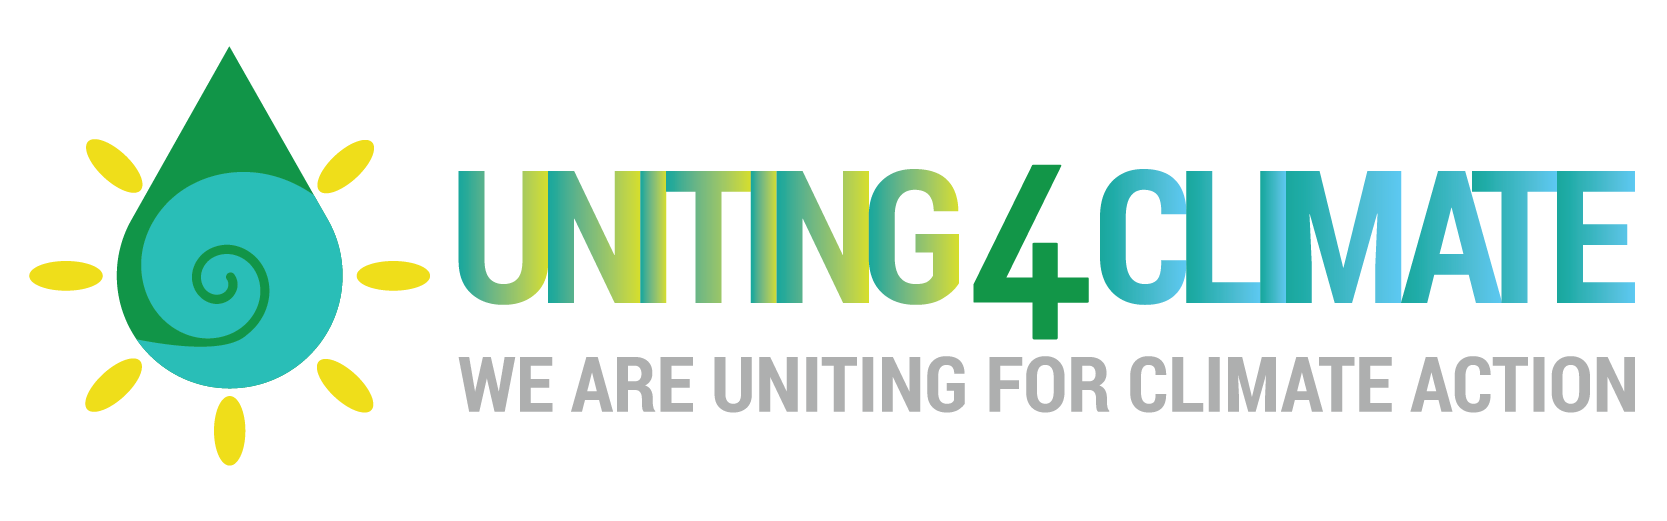 #Uniting4Climate: Uniting for Climate Action